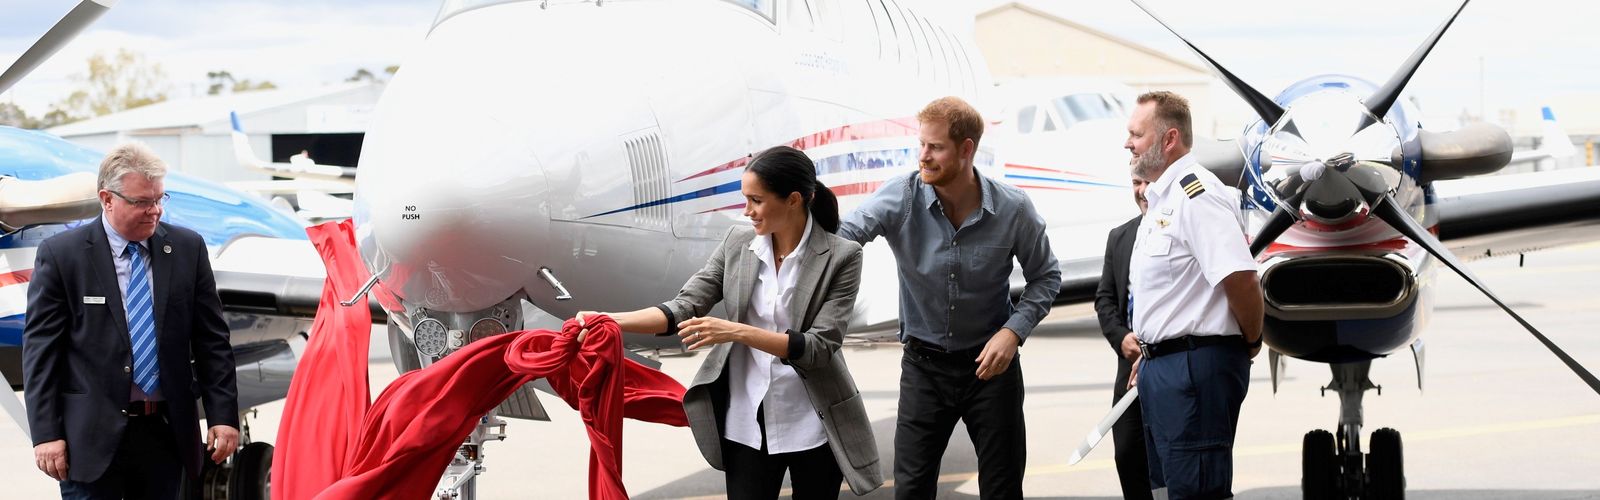 TRH Prince Harry and Meghan reveal name of new aircraft